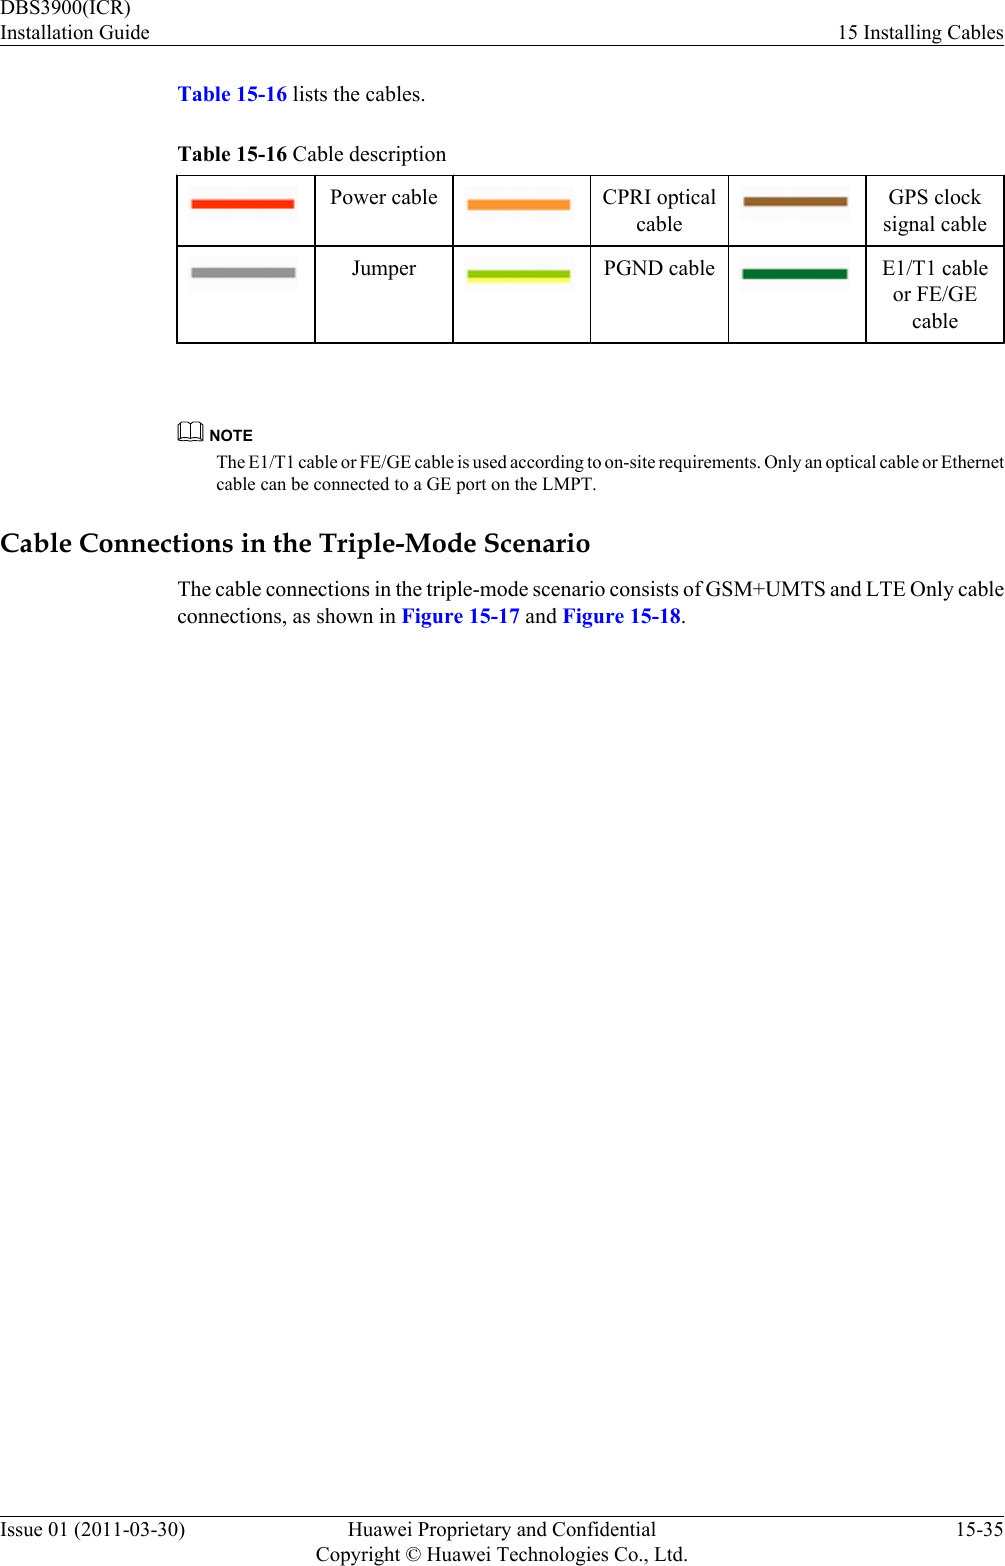 Table 15-16 lists the cables.Table 15-16 Cable descriptionPower cable CPRI opticalcableGPS clocksignal cableJumper PGND cable E1/T1 cableor FE/GEcable NOTEThe E1/T1 cable or FE/GE cable is used according to on-site requirements. Only an optical cable or Ethernetcable can be connected to a GE port on the LMPT.Cable Connections in the Triple-Mode ScenarioThe cable connections in the triple-mode scenario consists of GSM+UMTS and LTE Only cableconnections, as shown in Figure 15-17 and Figure 15-18.DBS3900(ICR)Installation Guide 15 Installing CablesIssue 01 (2011-03-30) Huawei Proprietary and ConfidentialCopyright © Huawei Technologies Co., Ltd.15-35